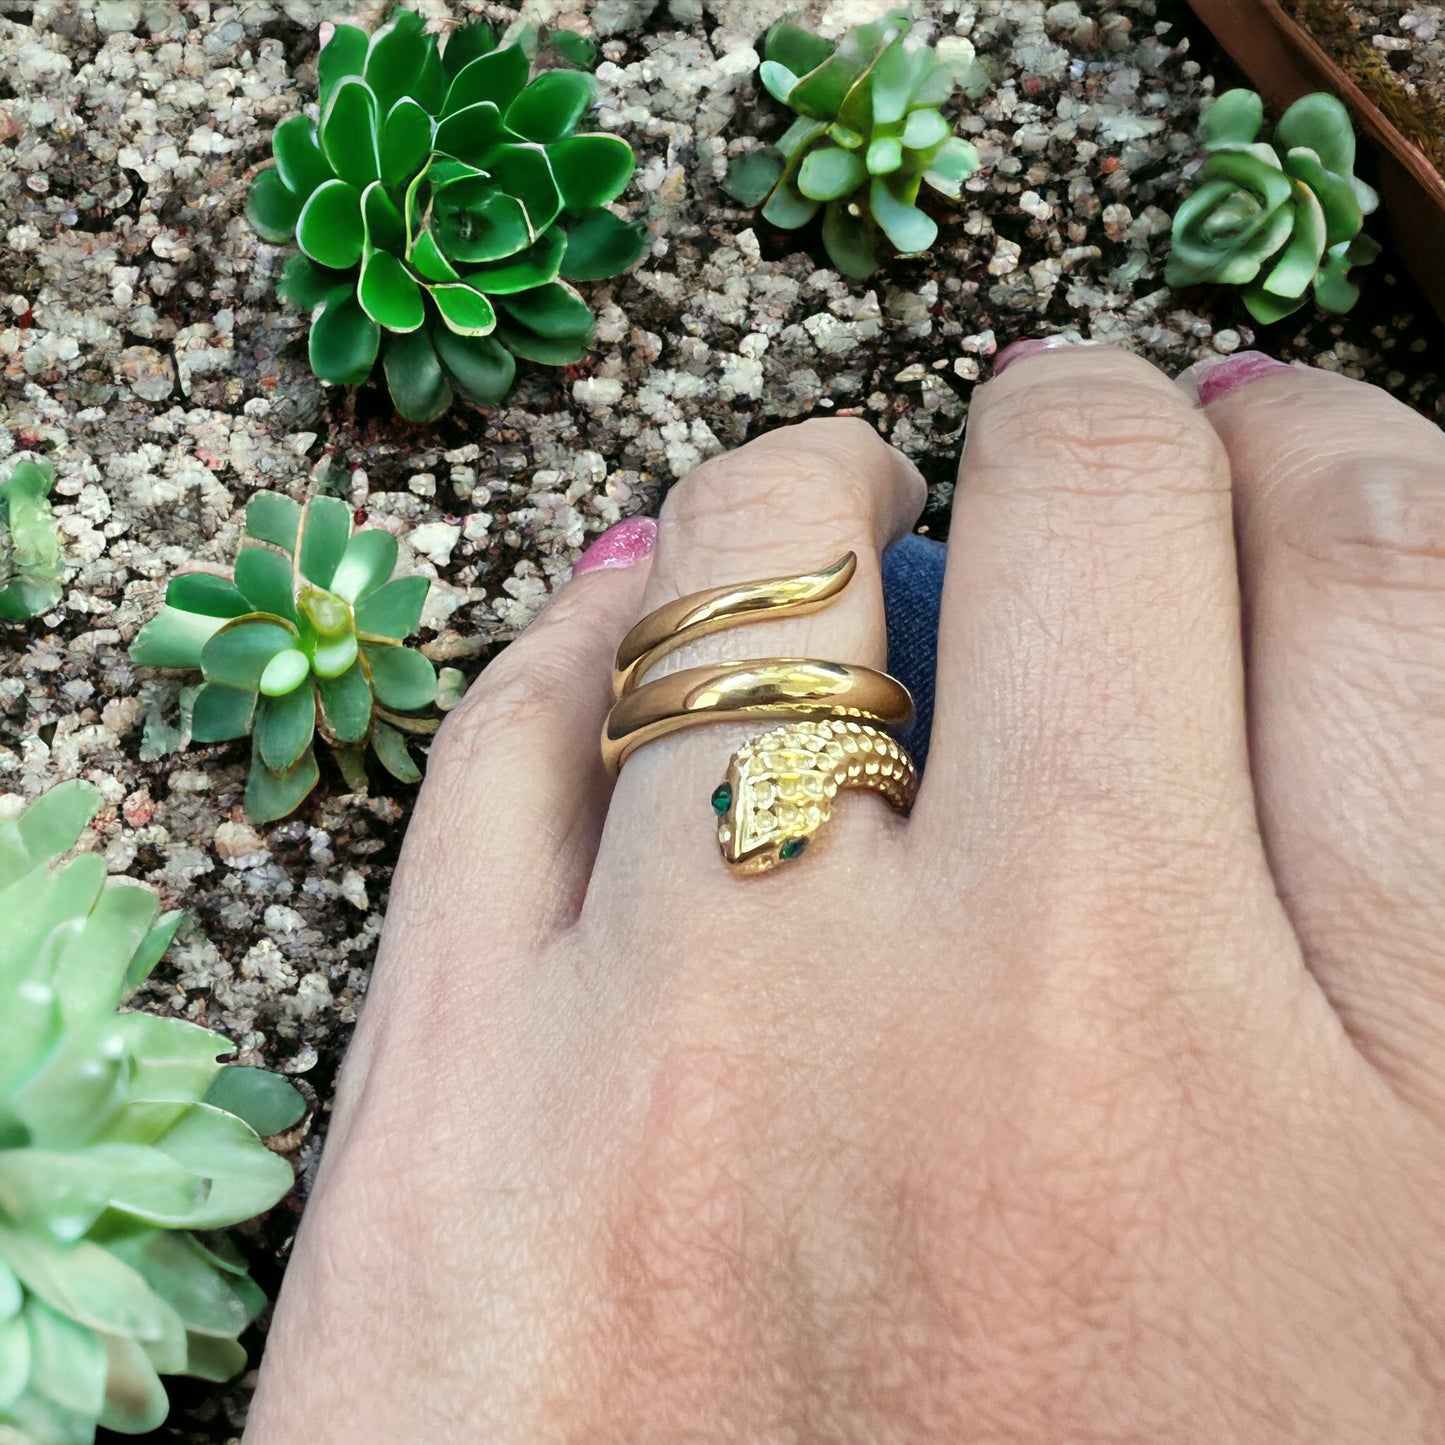 Serpentine Allure: Gold Snake Ring for Women with Captivating Green Eyes - Elevate Your Style with this Daring and Fashionable Statement Piece